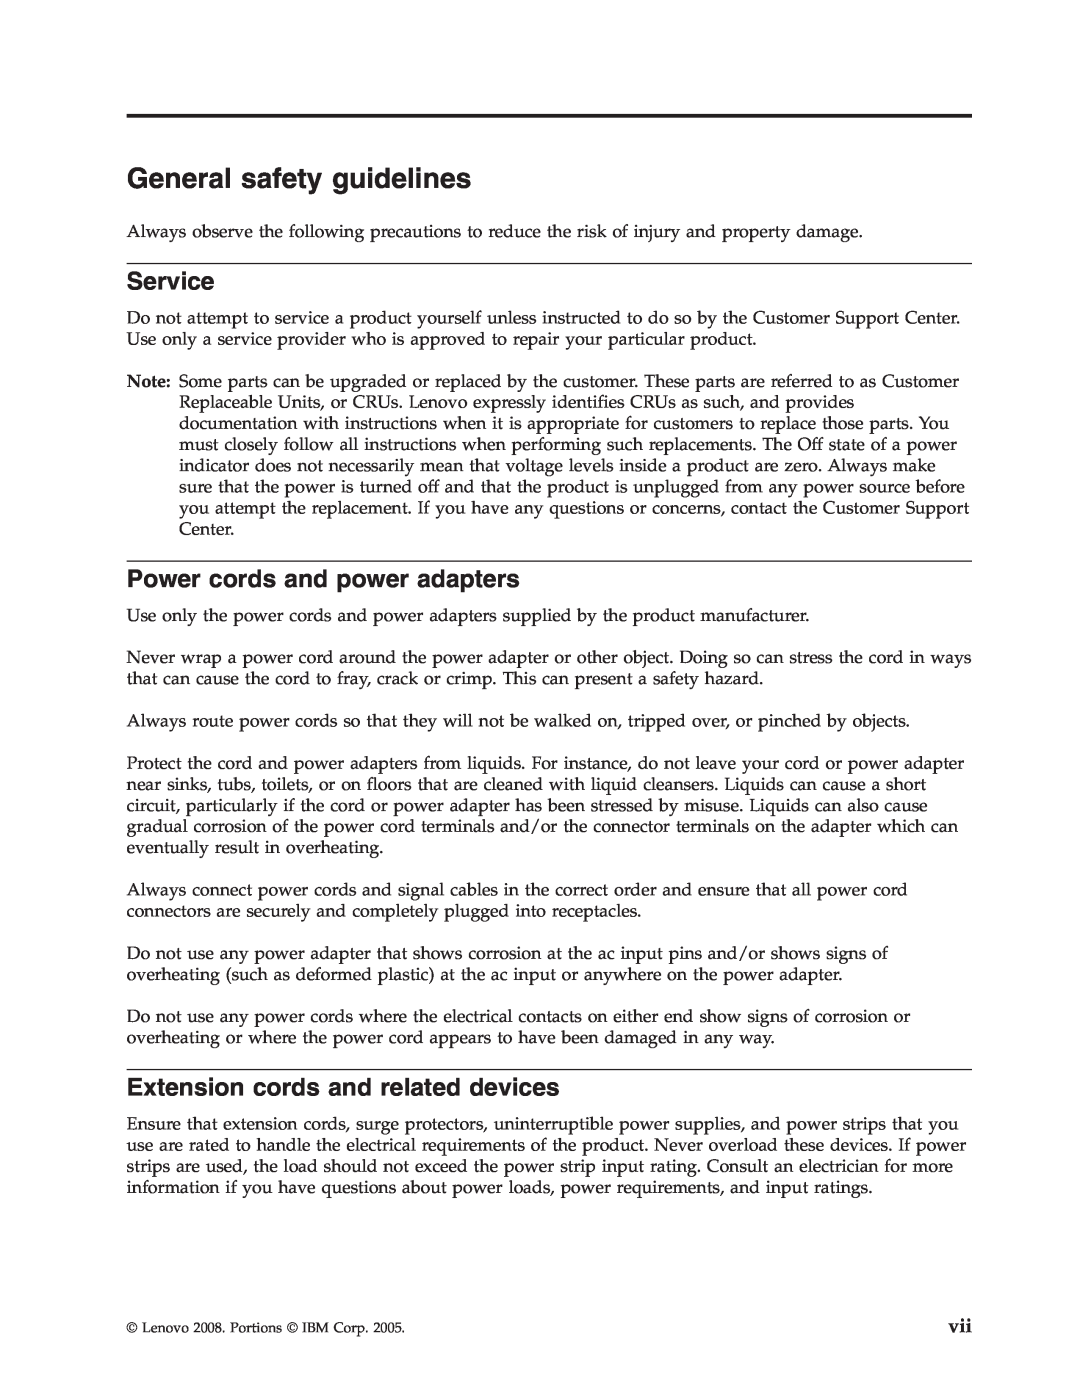 Lenovo 43N3224 General safety guidelines, Service, Power cords and power adapters, Extension cords and related devices 